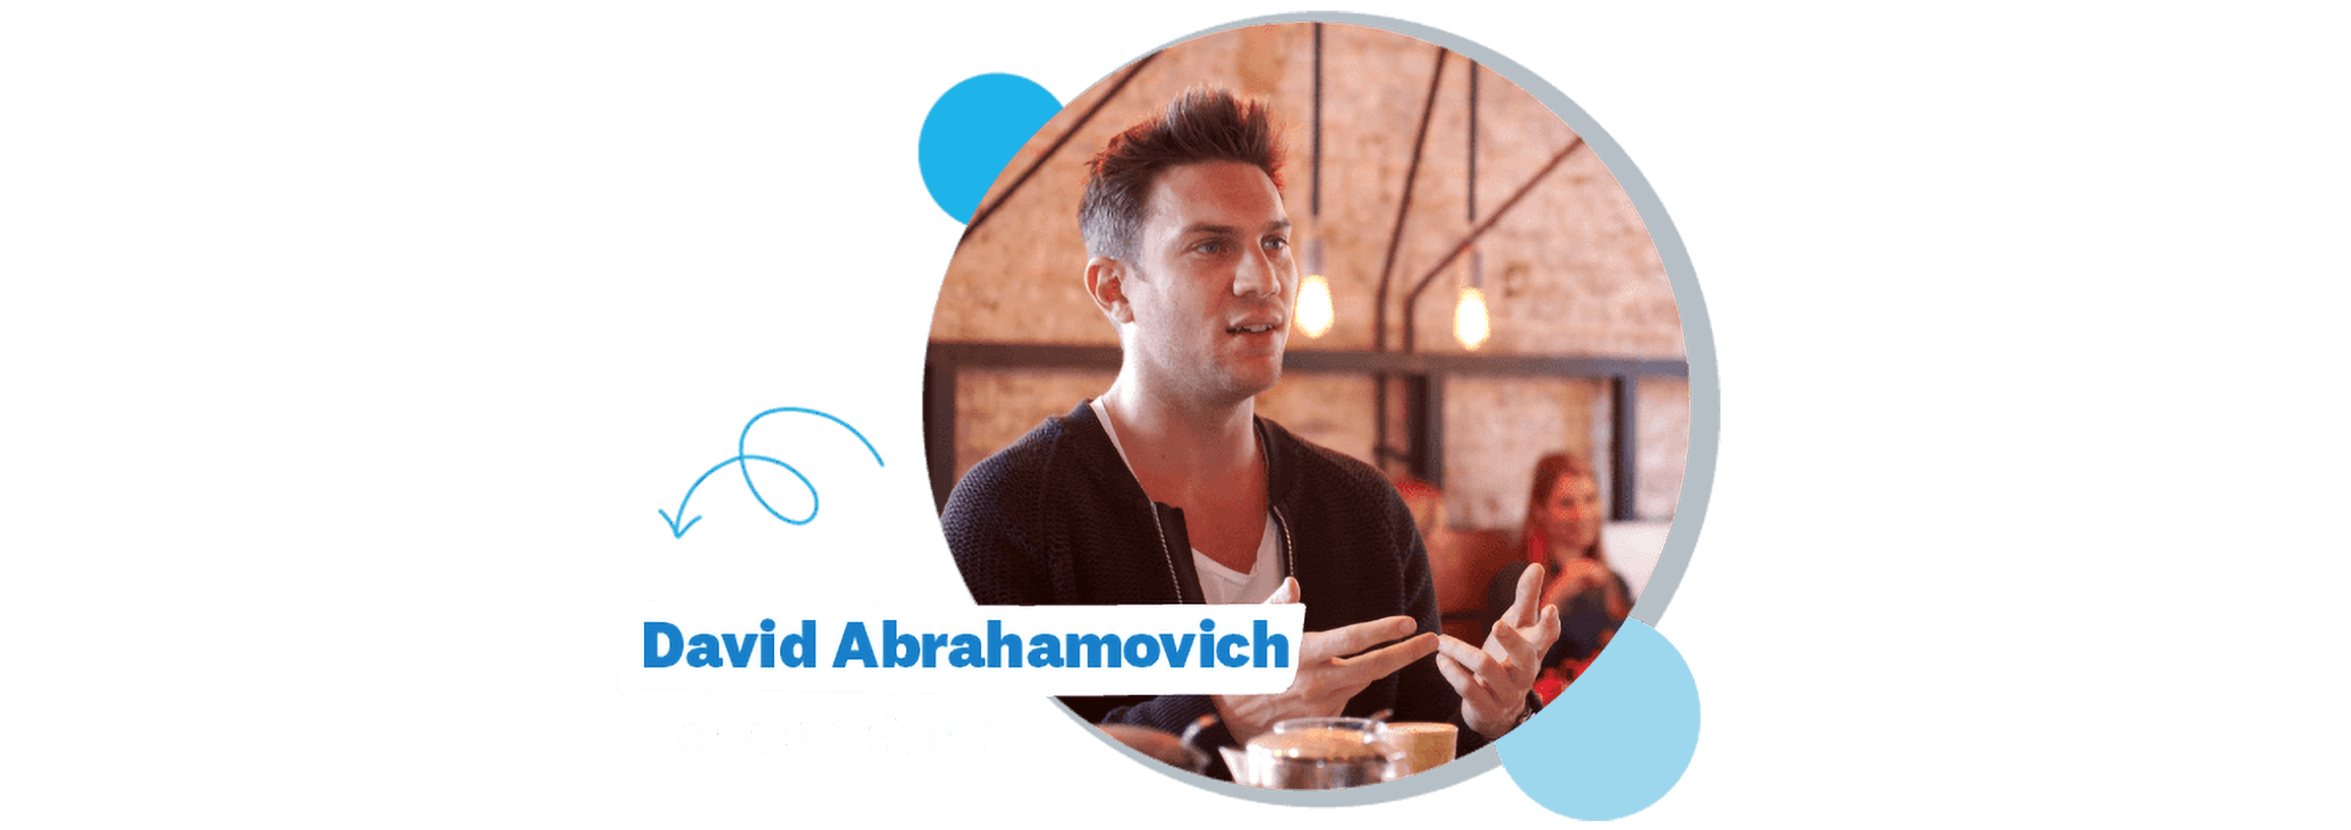 Over coffee, David Abrahamovich, CEO & Co-founder of London Grind, explains to a friend why he loves Xero. 